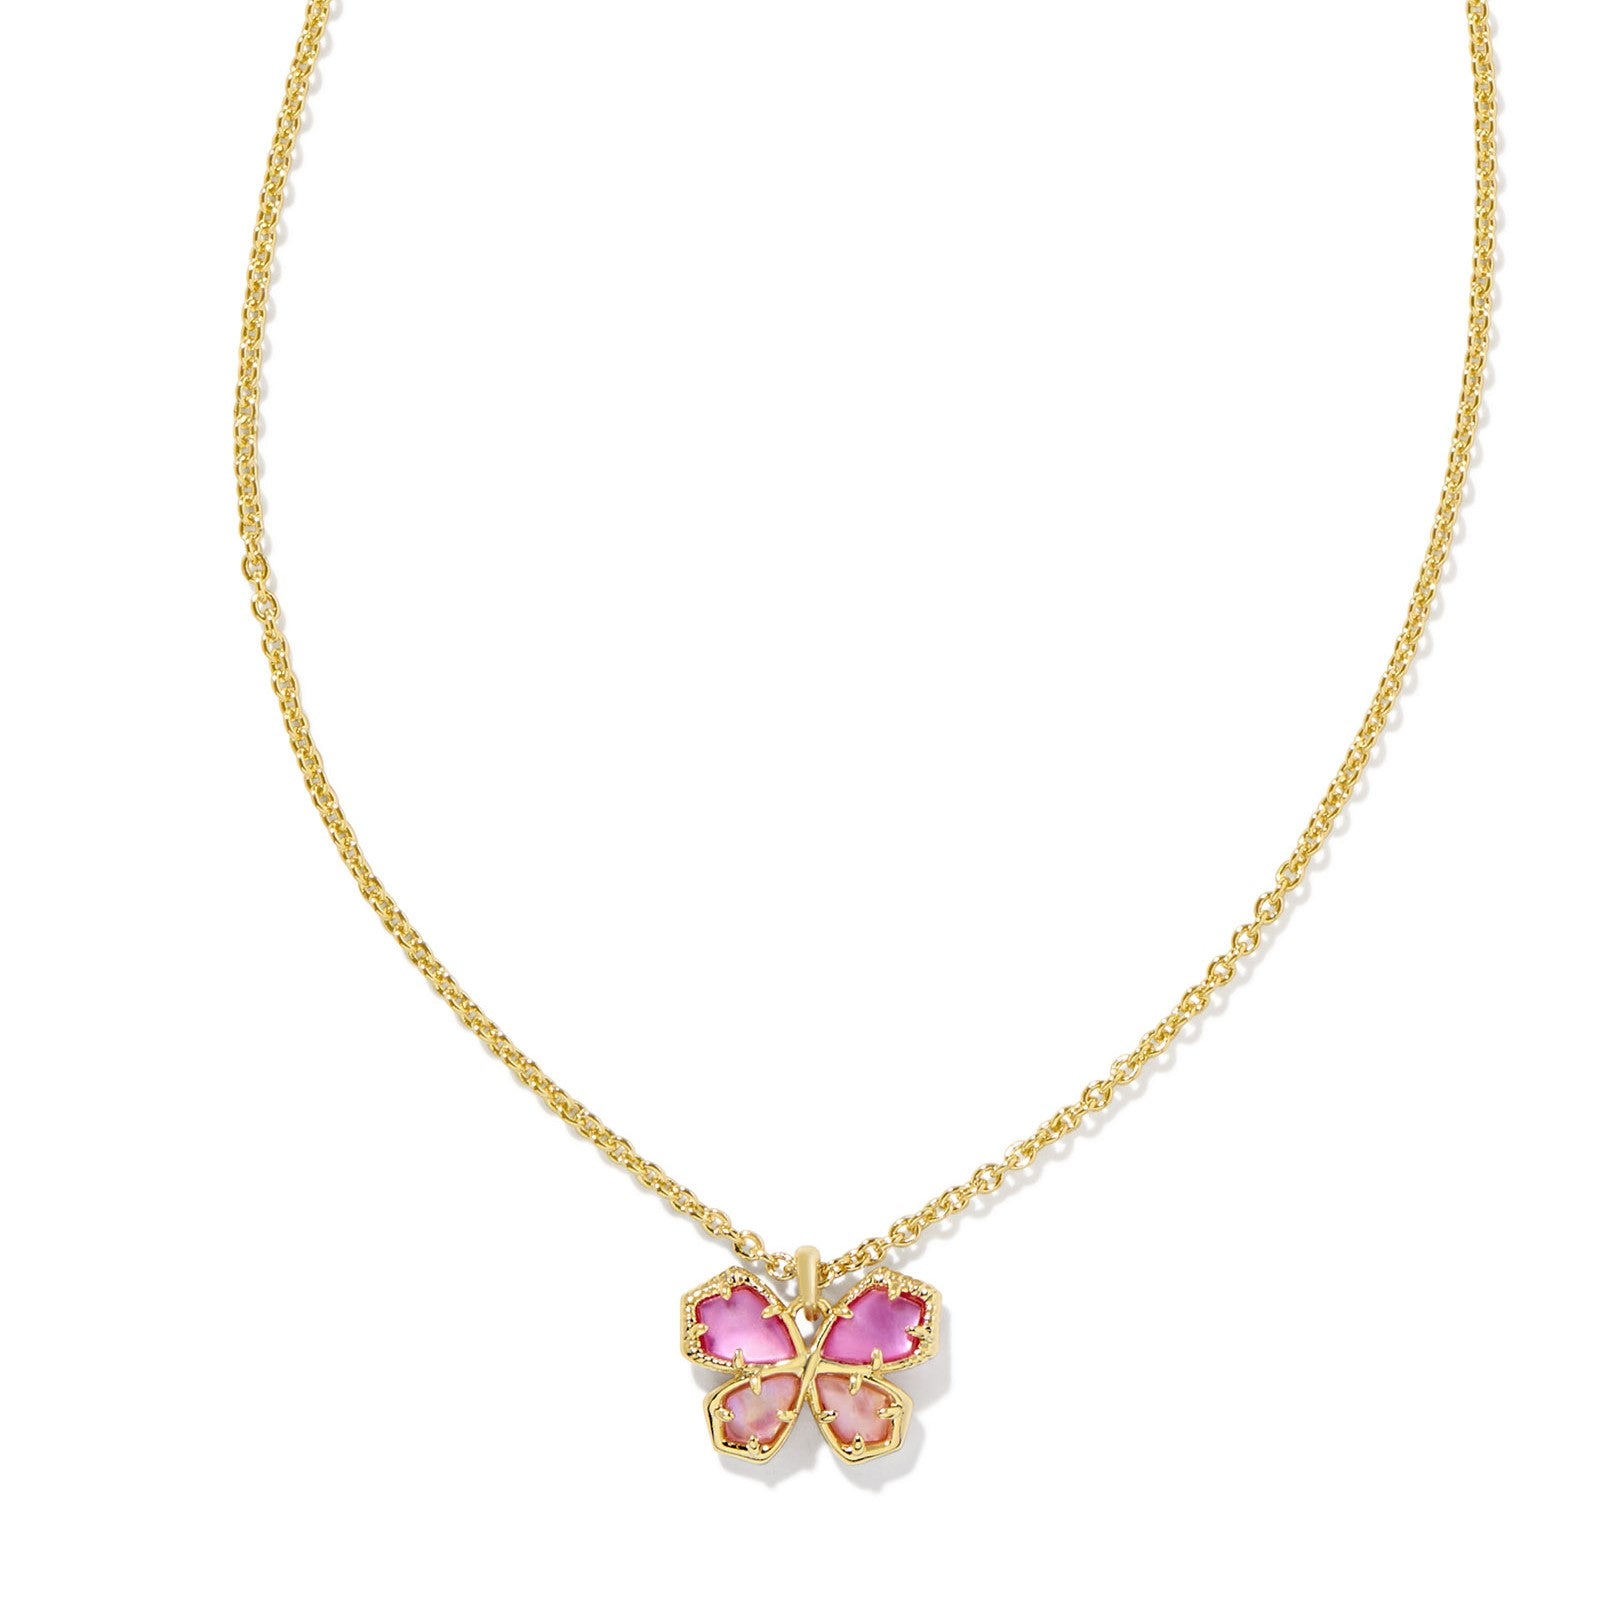 Kendra Scott | Mae Gold Butterfly Short Pendant Necklace in Azalea Illusion - Giddy Up Glamour Boutique